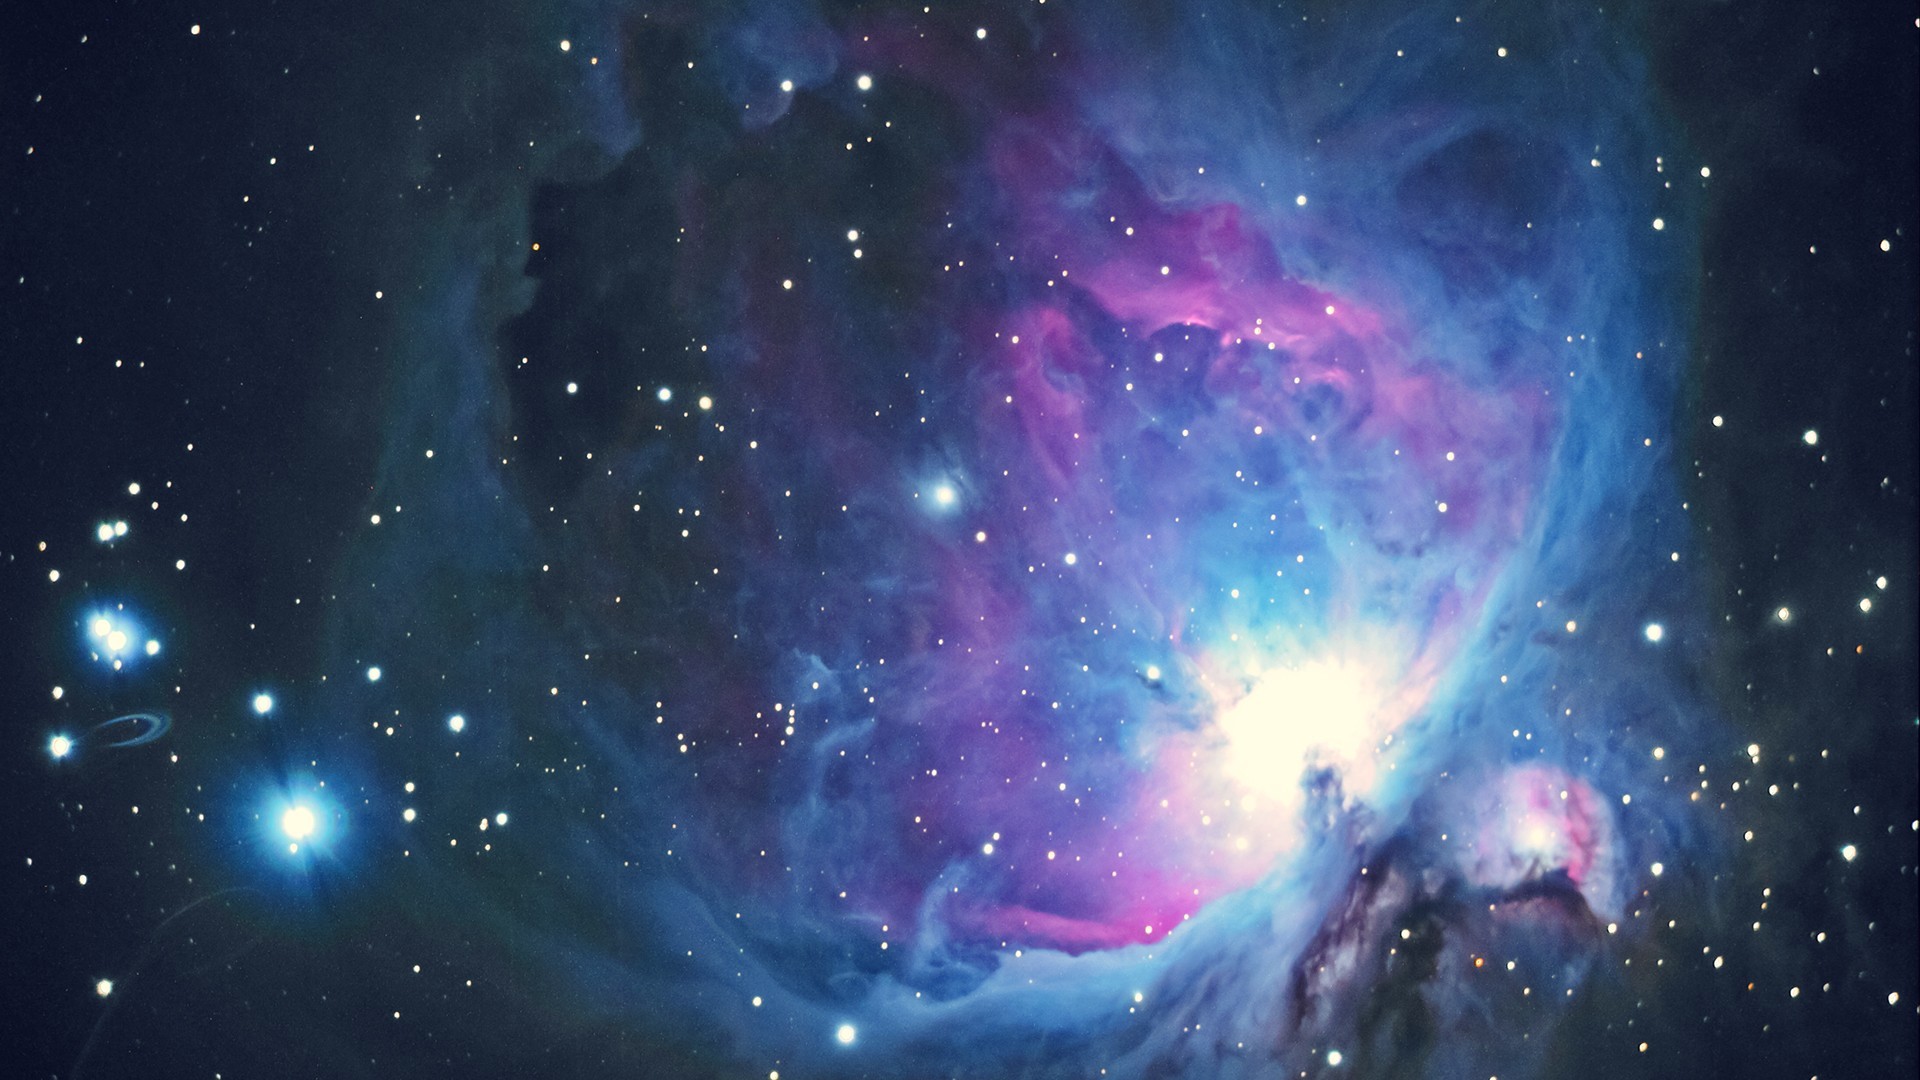 Outer Space Wallpaper Cool 50r3296v Yoanu